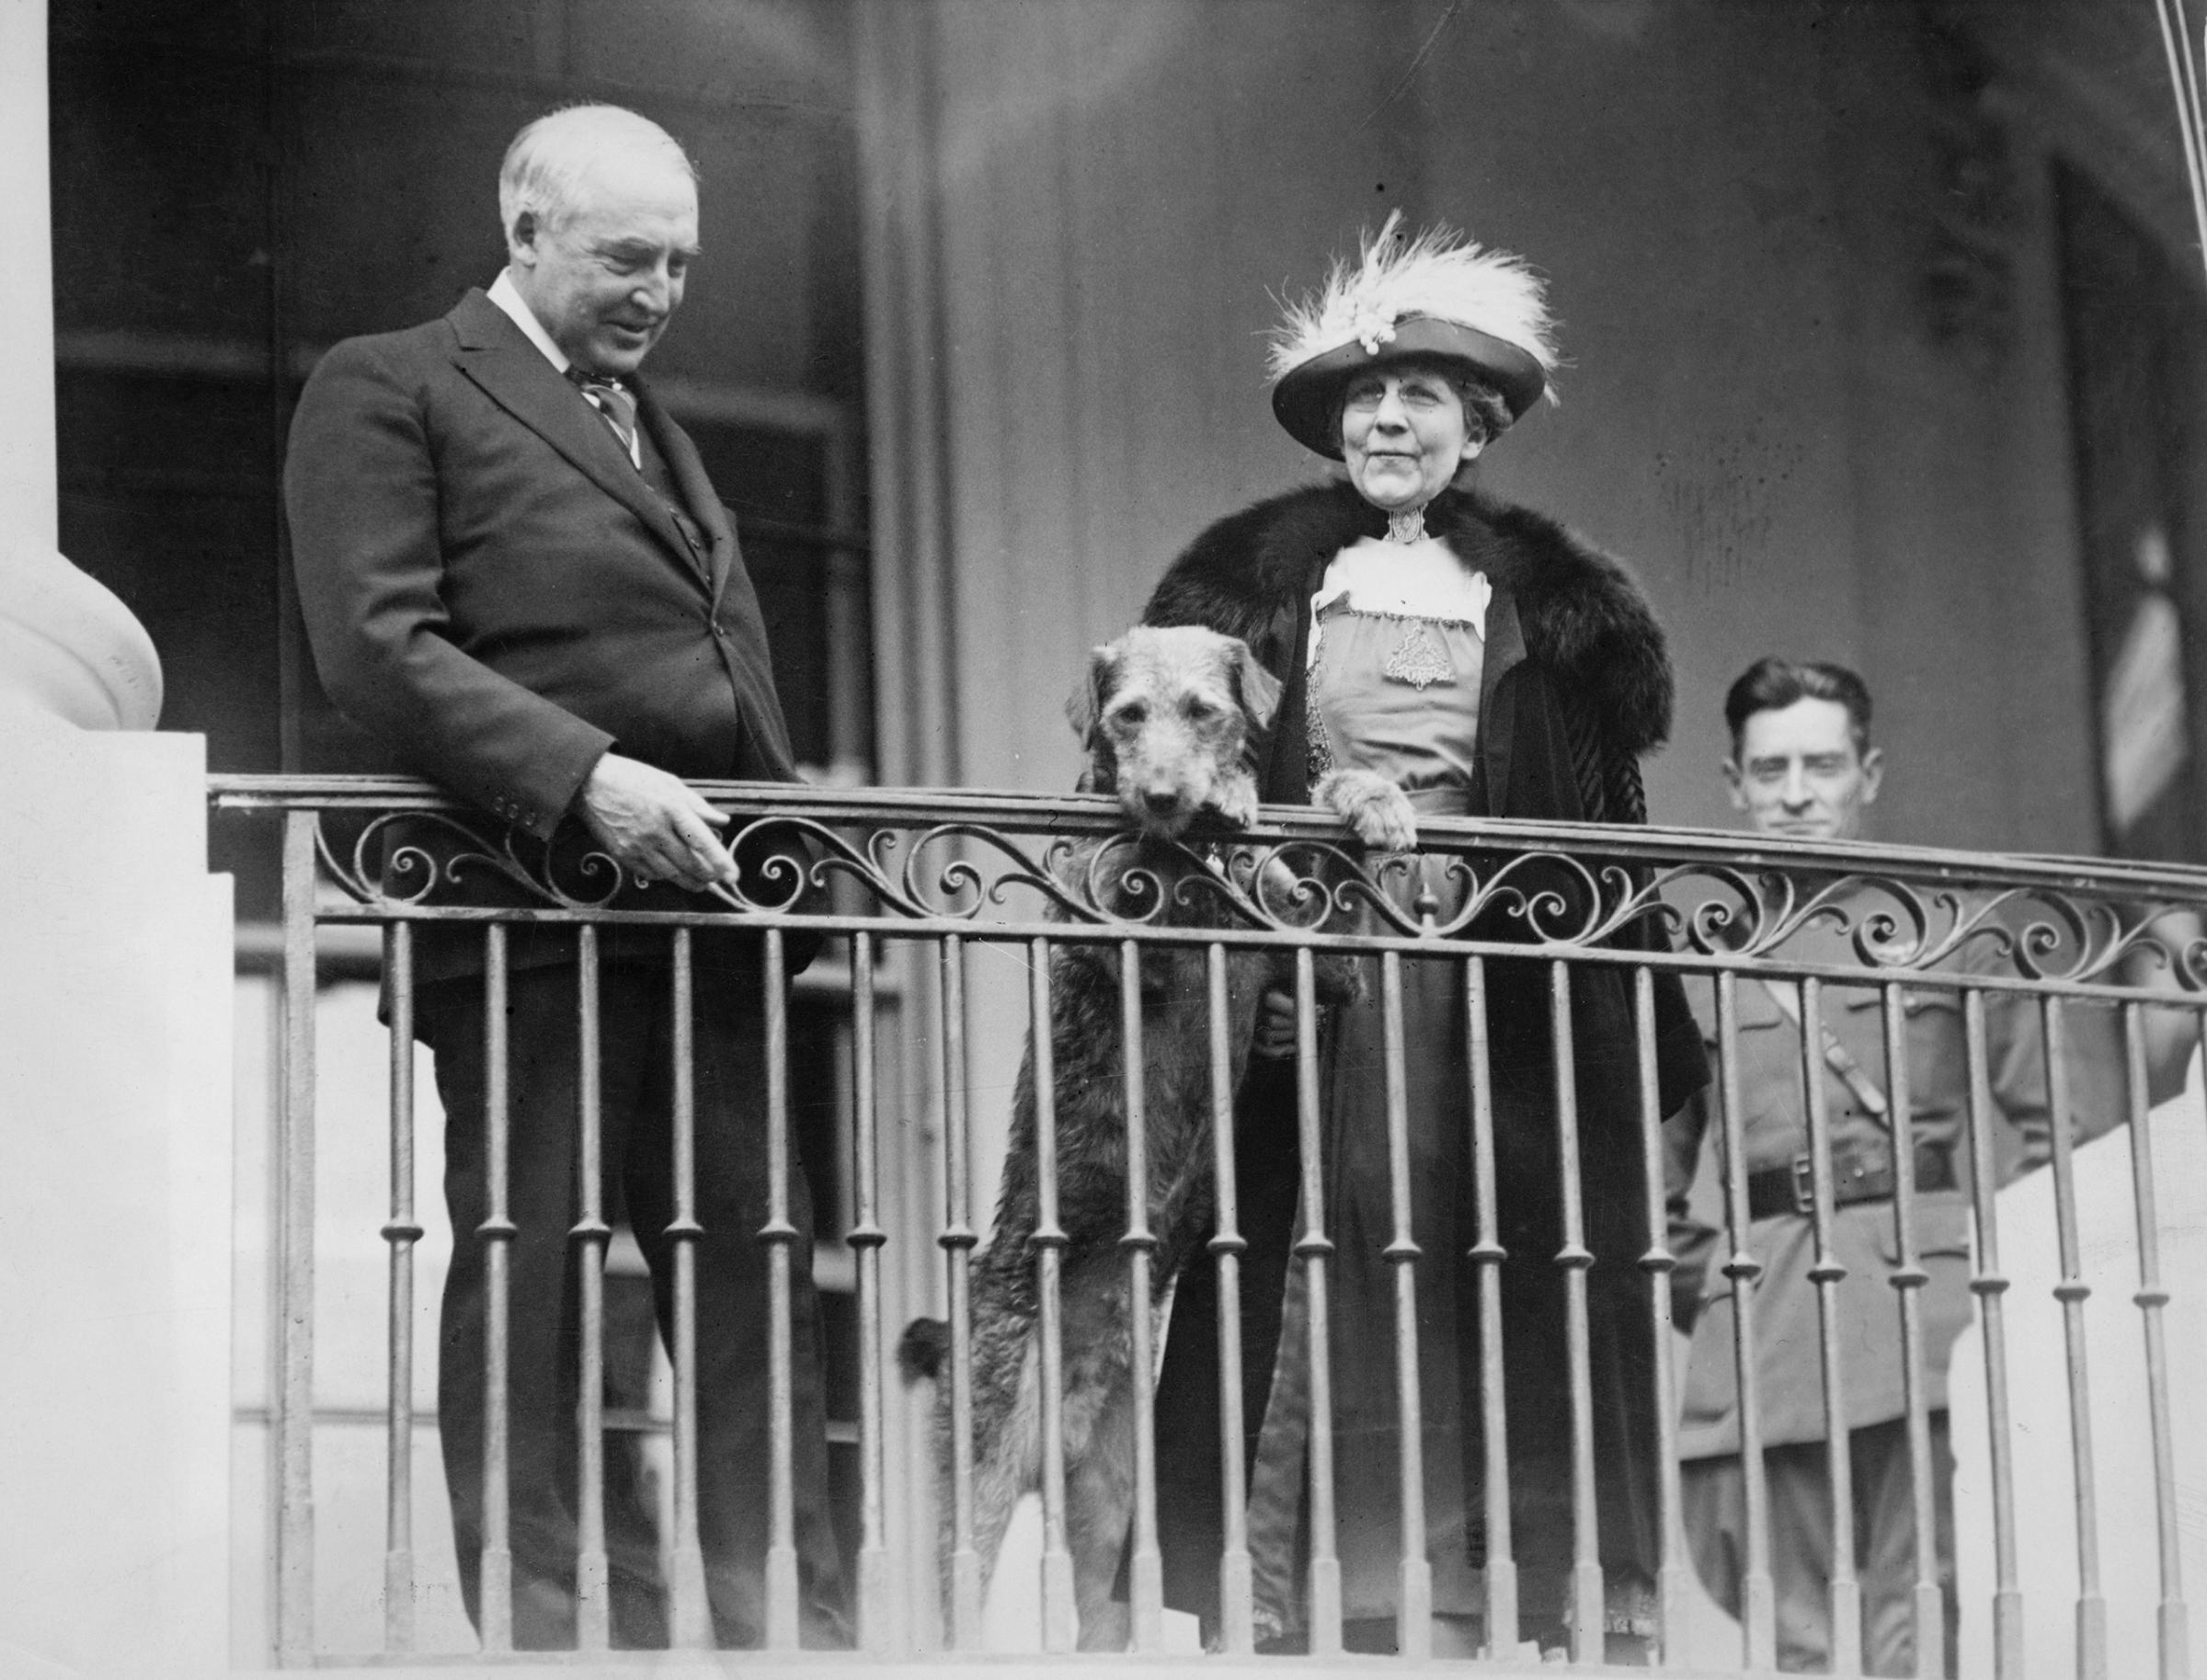 Warren G. Harding, Florence Harding, and their dog, Laddie Boy, watch from a balcony as an annual Easter Monday children's egg-rolling event takes place on the White House lawn, circa 1922.